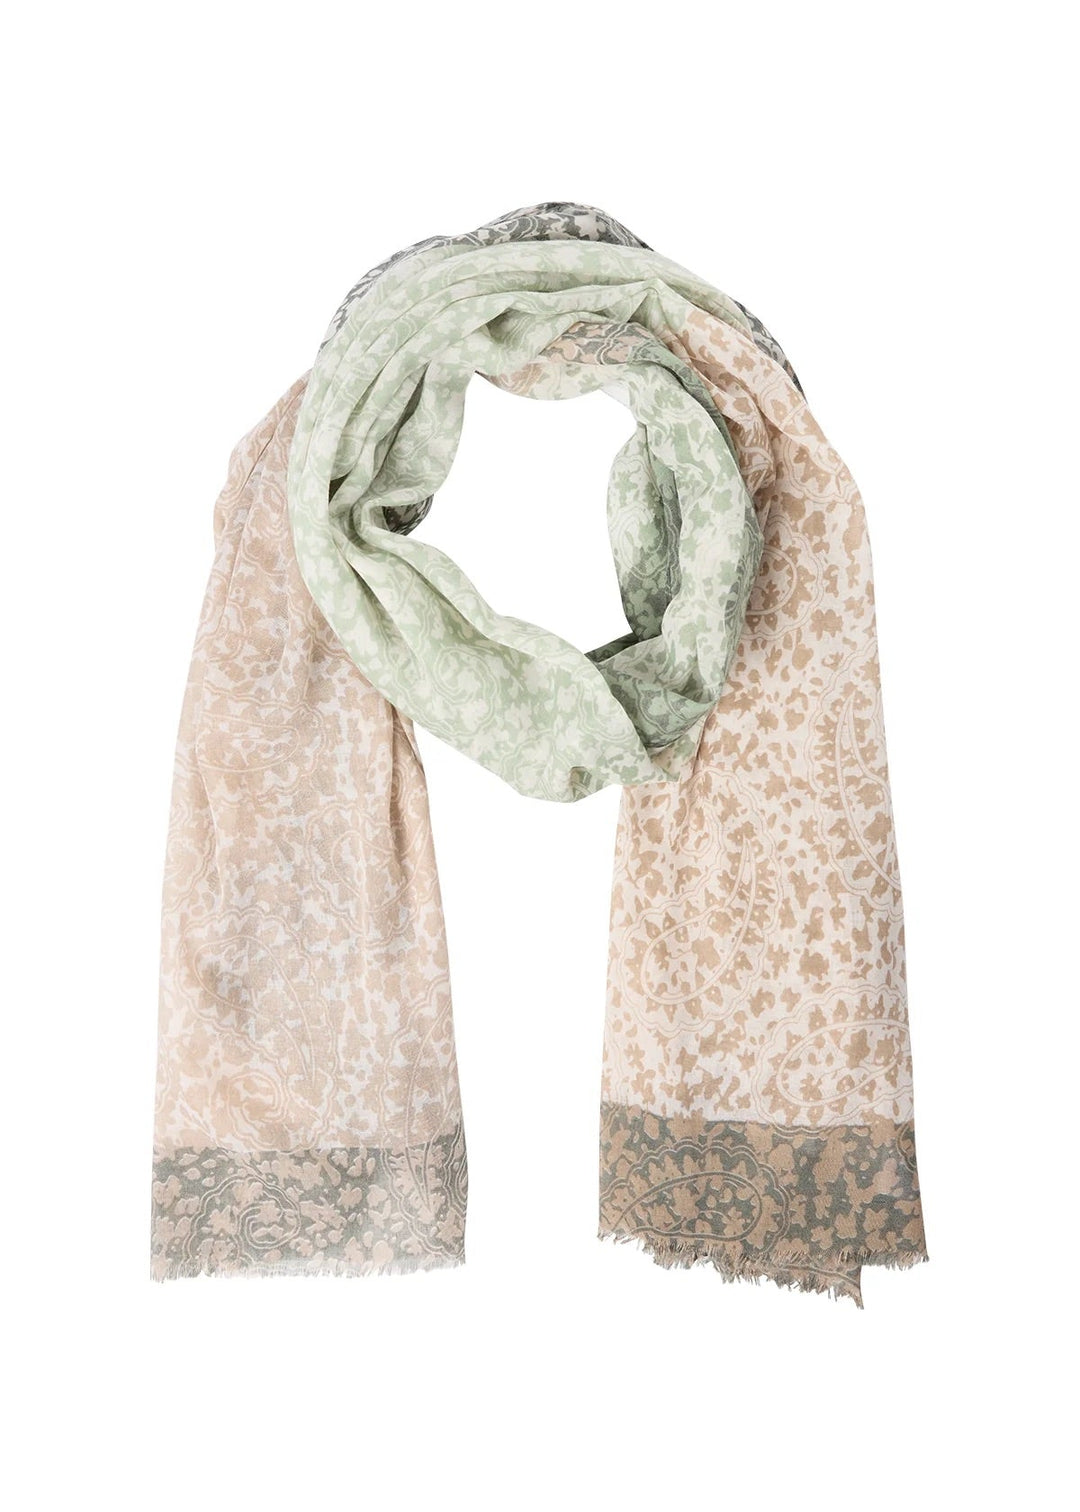 Soya Concept Denezia Scarf In Green Multi - Crabtree Cottage